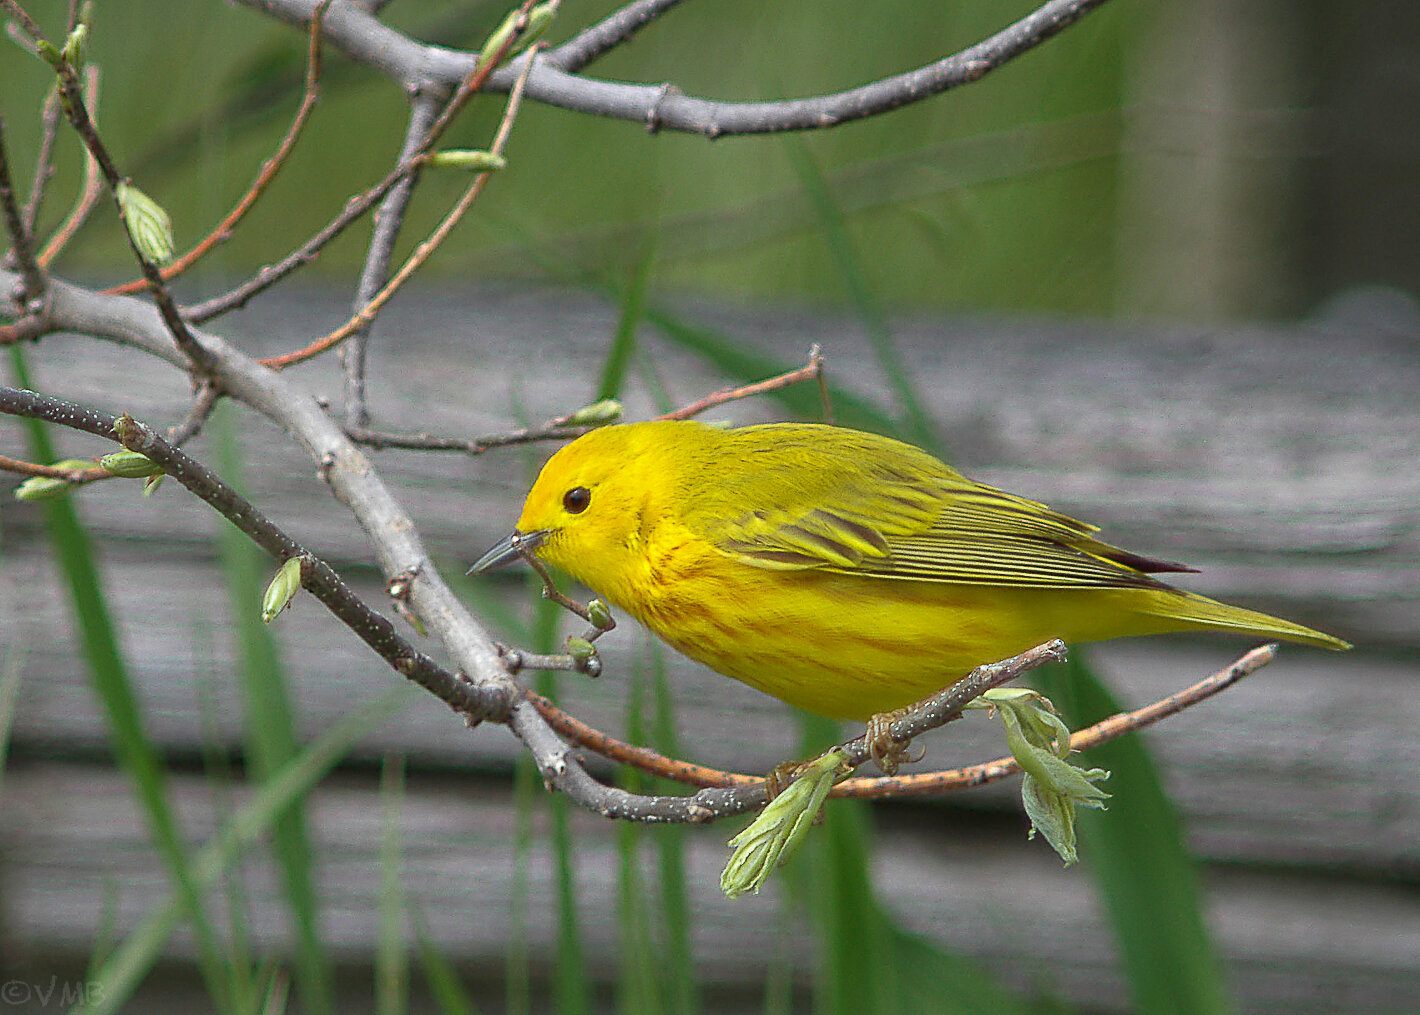 Yellow warblers are an insect-eating bird that might become a regular visitor to your brush pile.